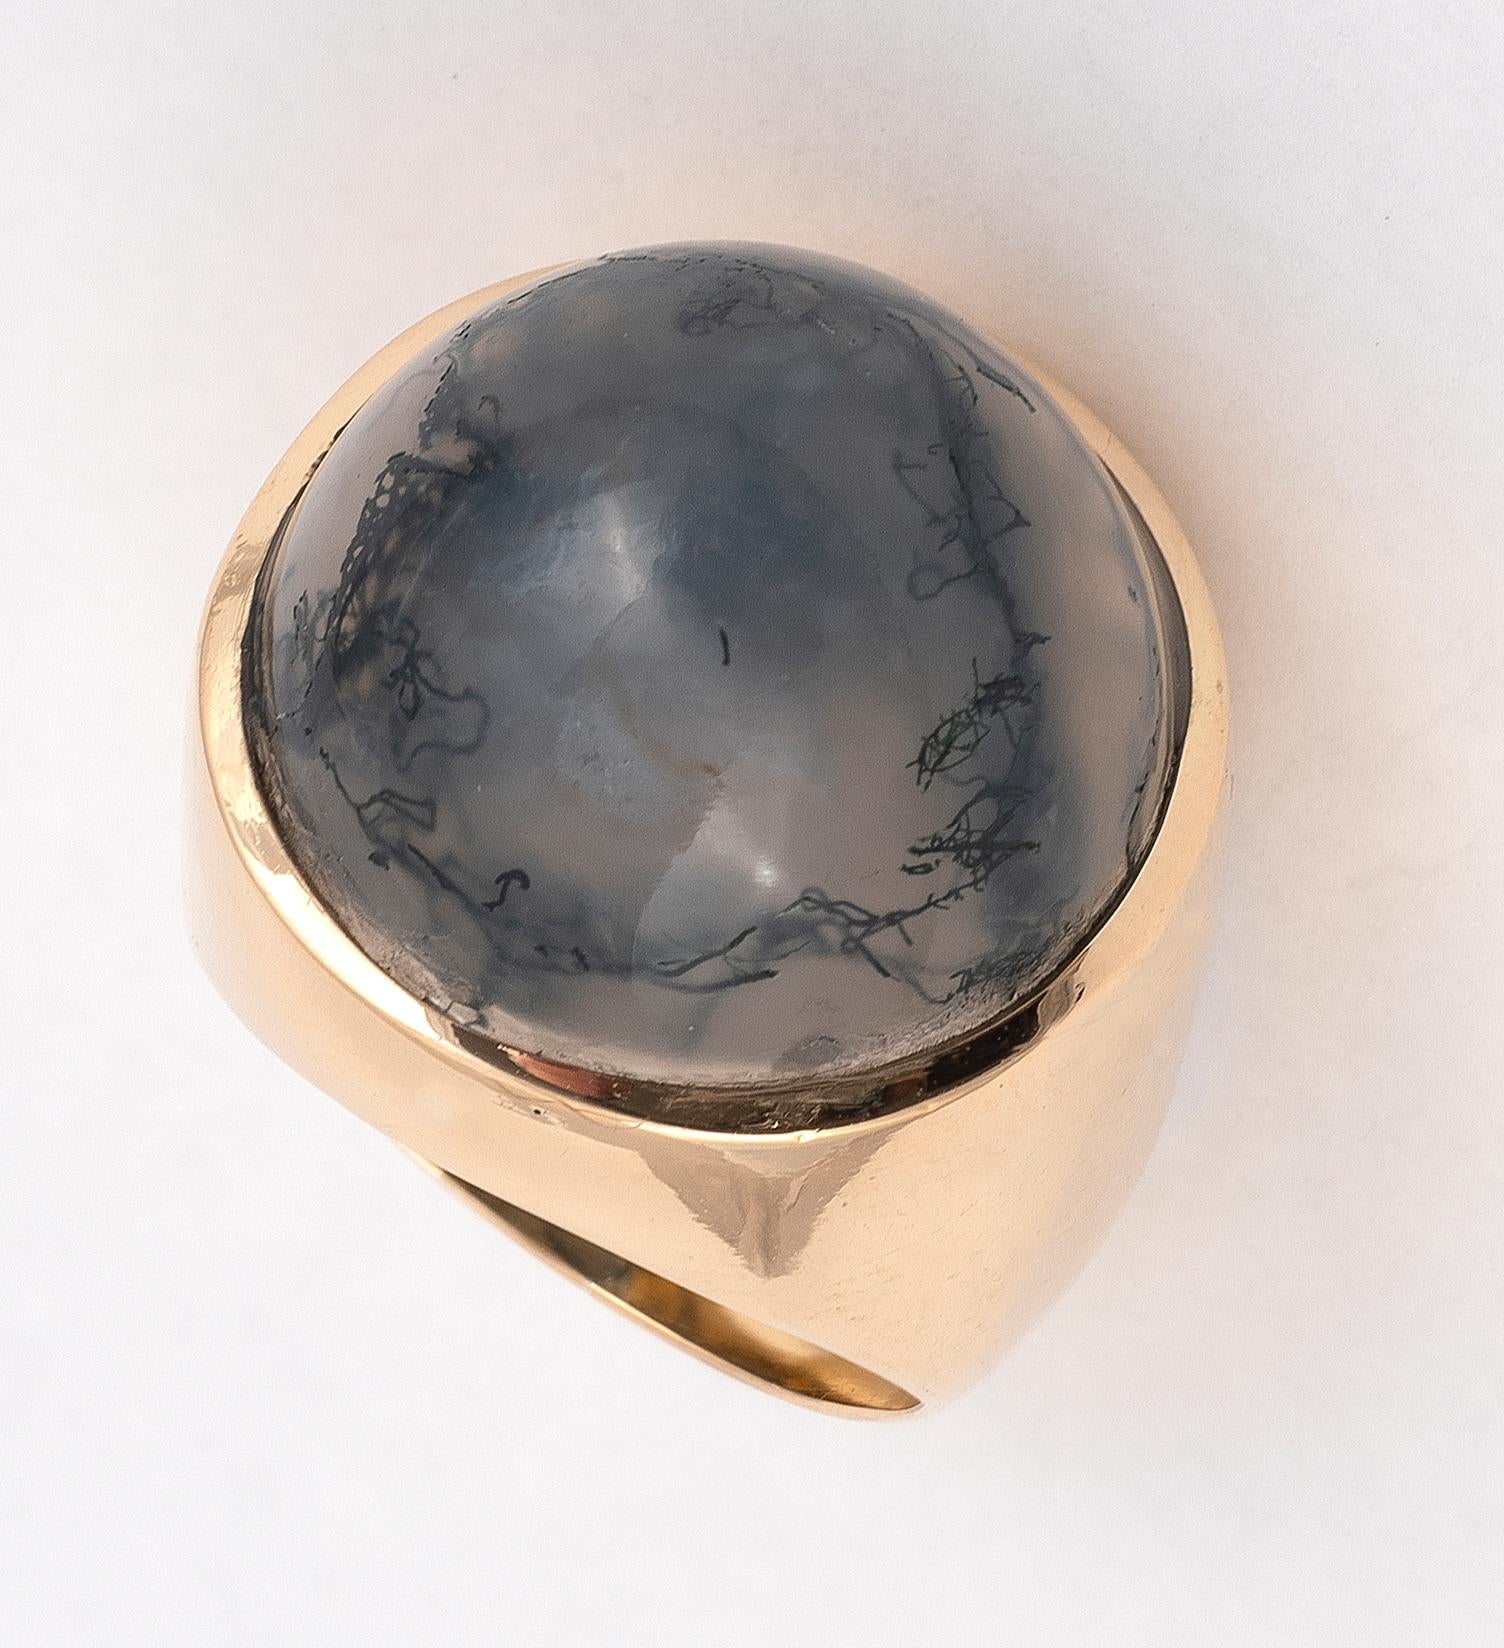 Ring in 18k yellow gold, set with a moss agate cabochon.
Size : 4
Weight : 9,5gr.